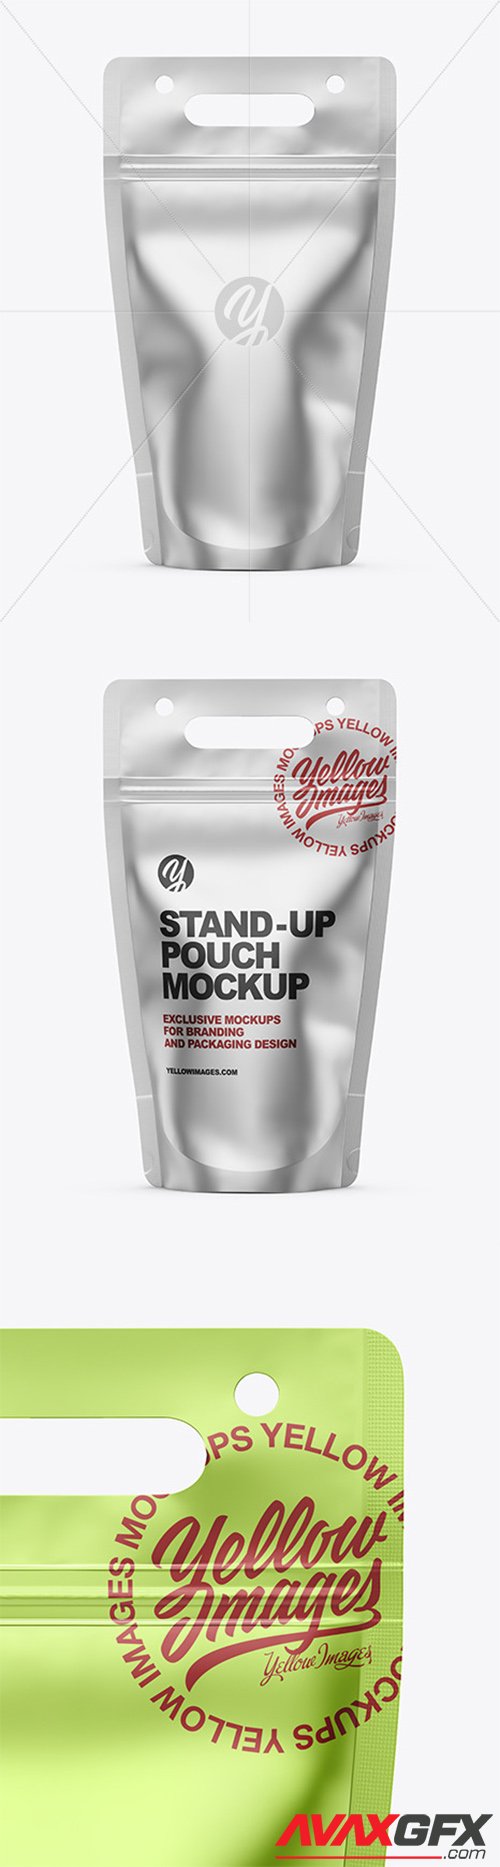 Metallic Stand-up Pouch Mockup 79426 TIF